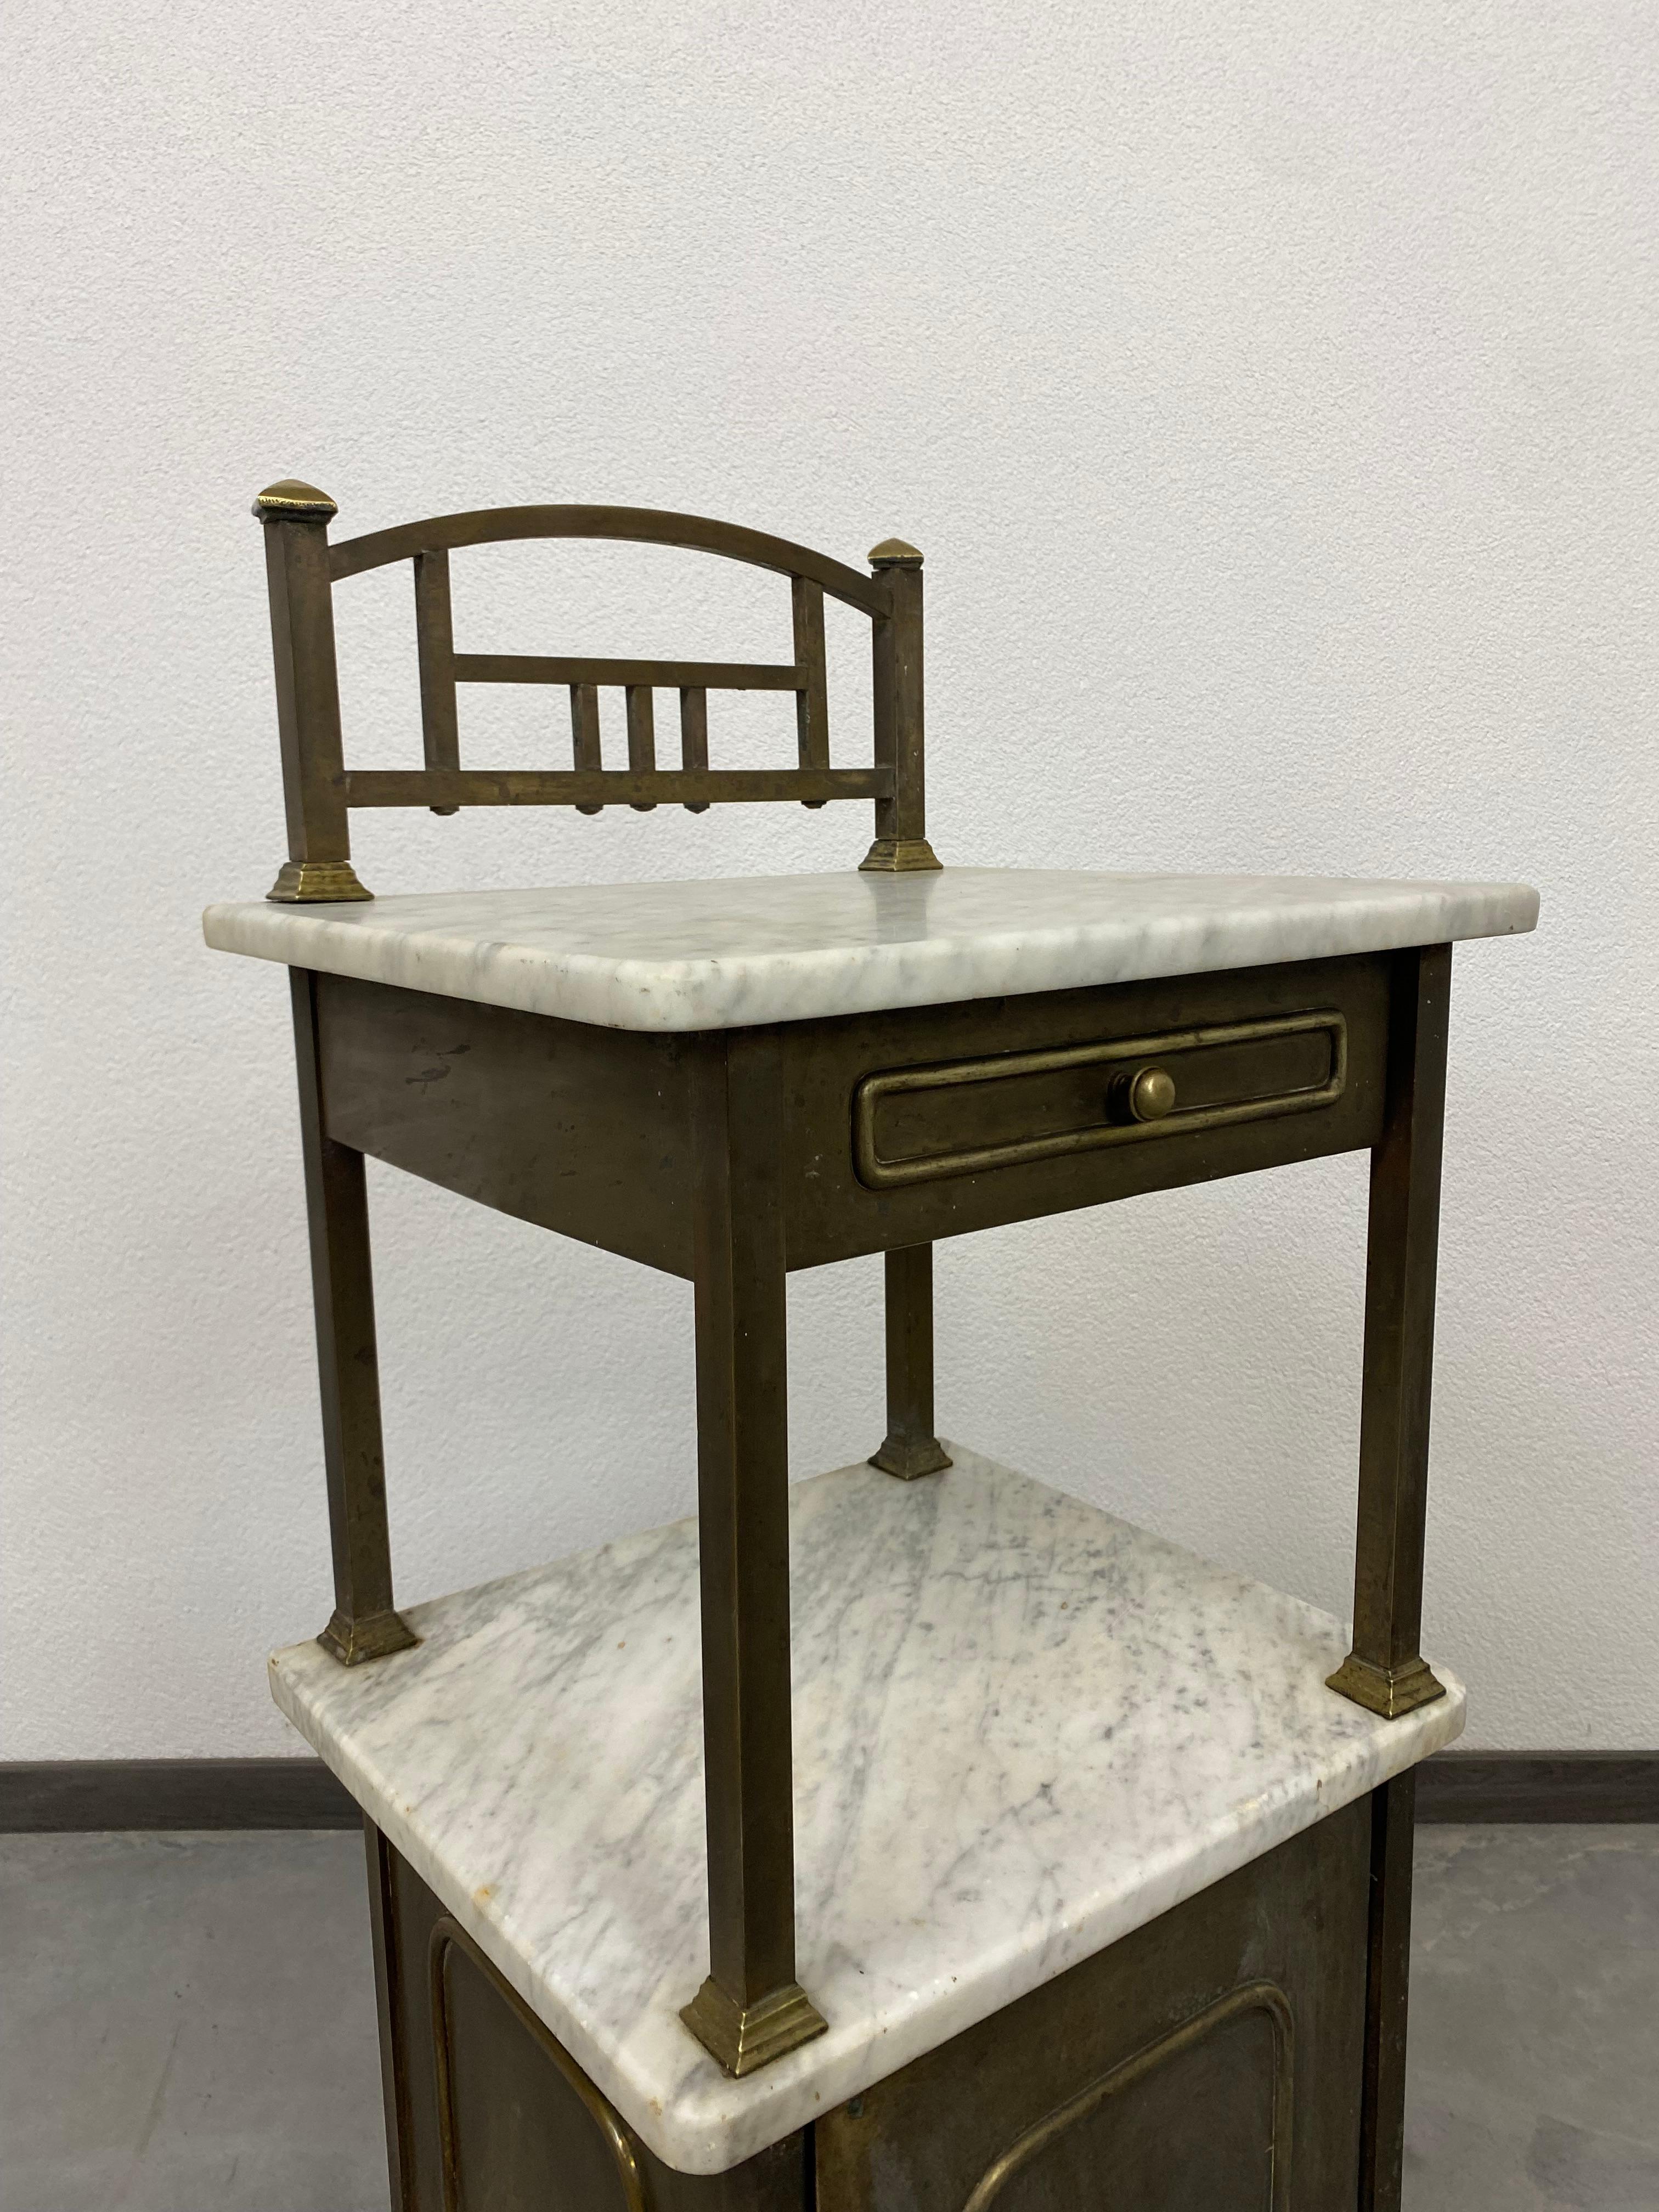 Brass bedside table with marble top. Maximum height is 101cm height of the marble top is 83cm from the floor.